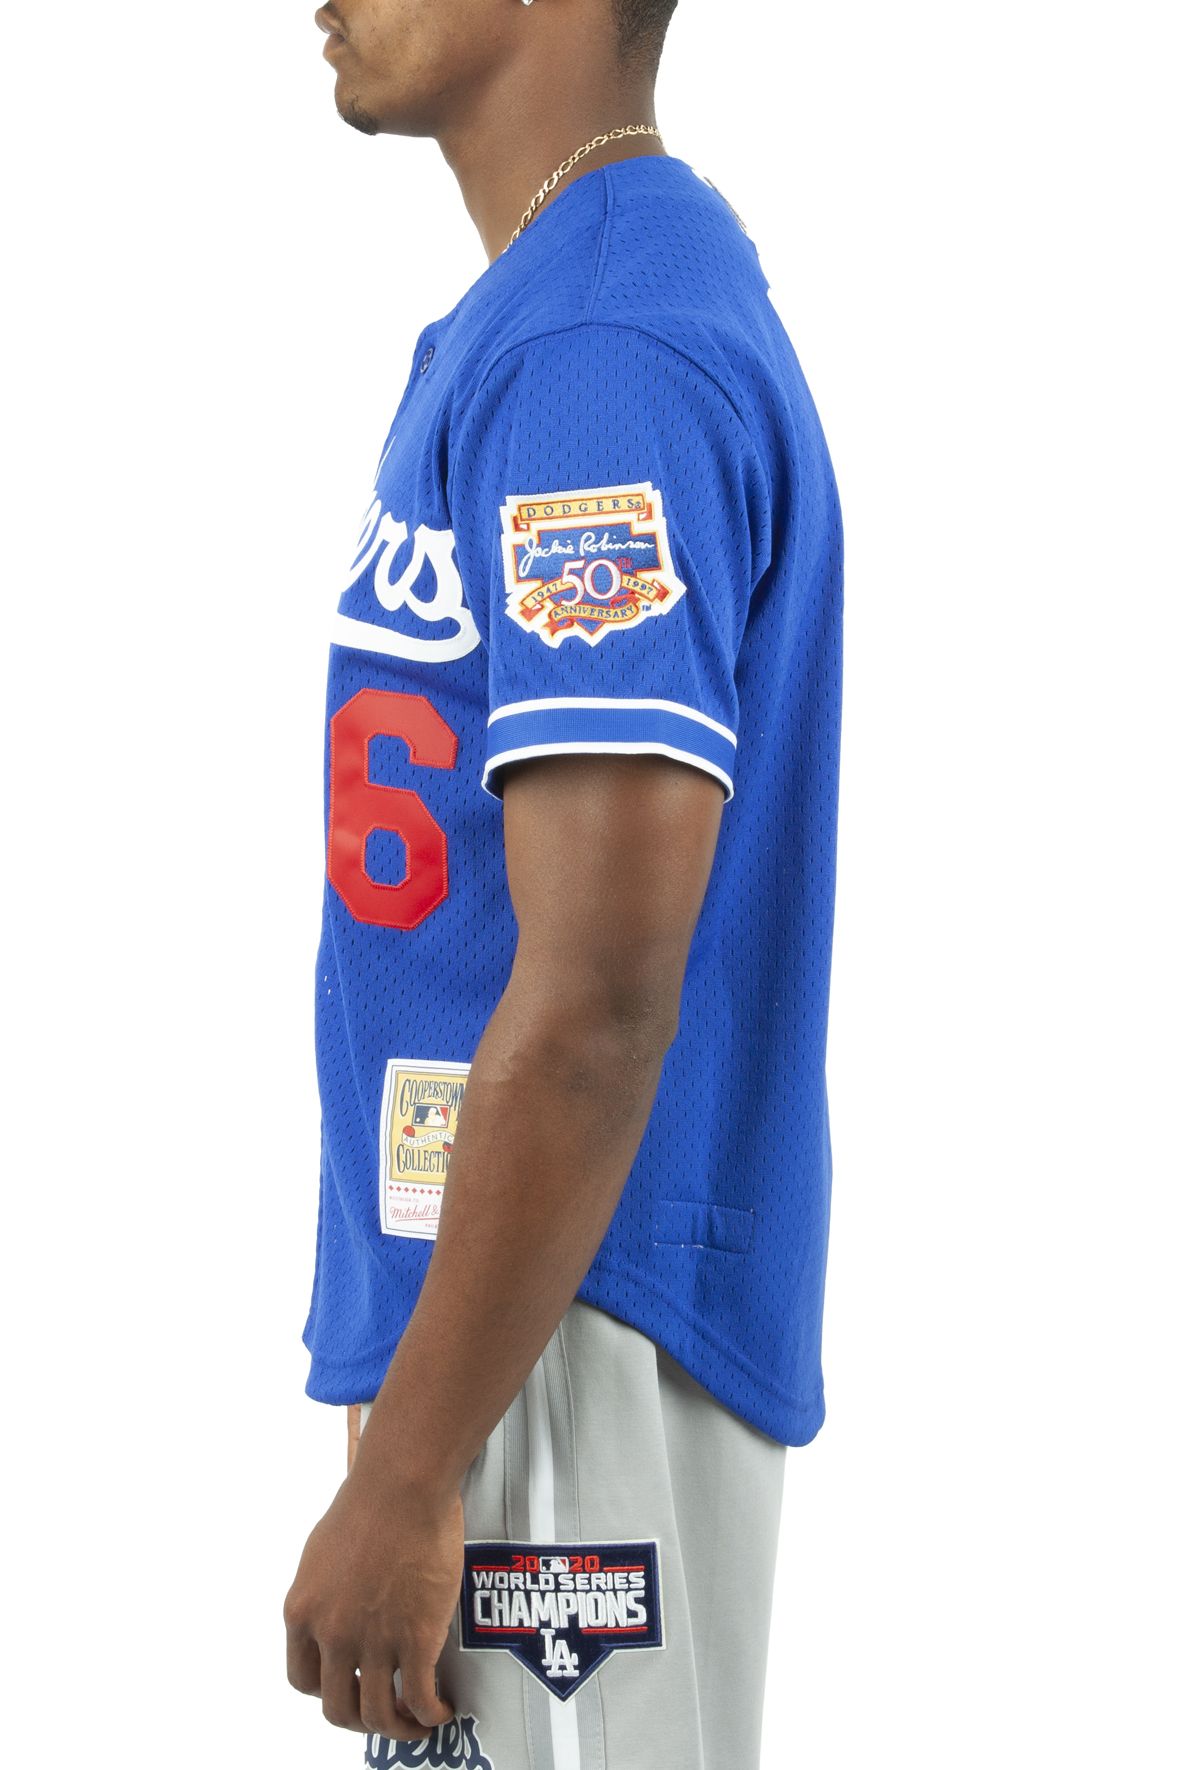 Authentic Hideo Nomo Los Angeles Dodgers 1997 Jersey - Shop Mitchell & Ness  Authentic Jerseys and Replicas Mitchell & Ness Nostalgia Co.